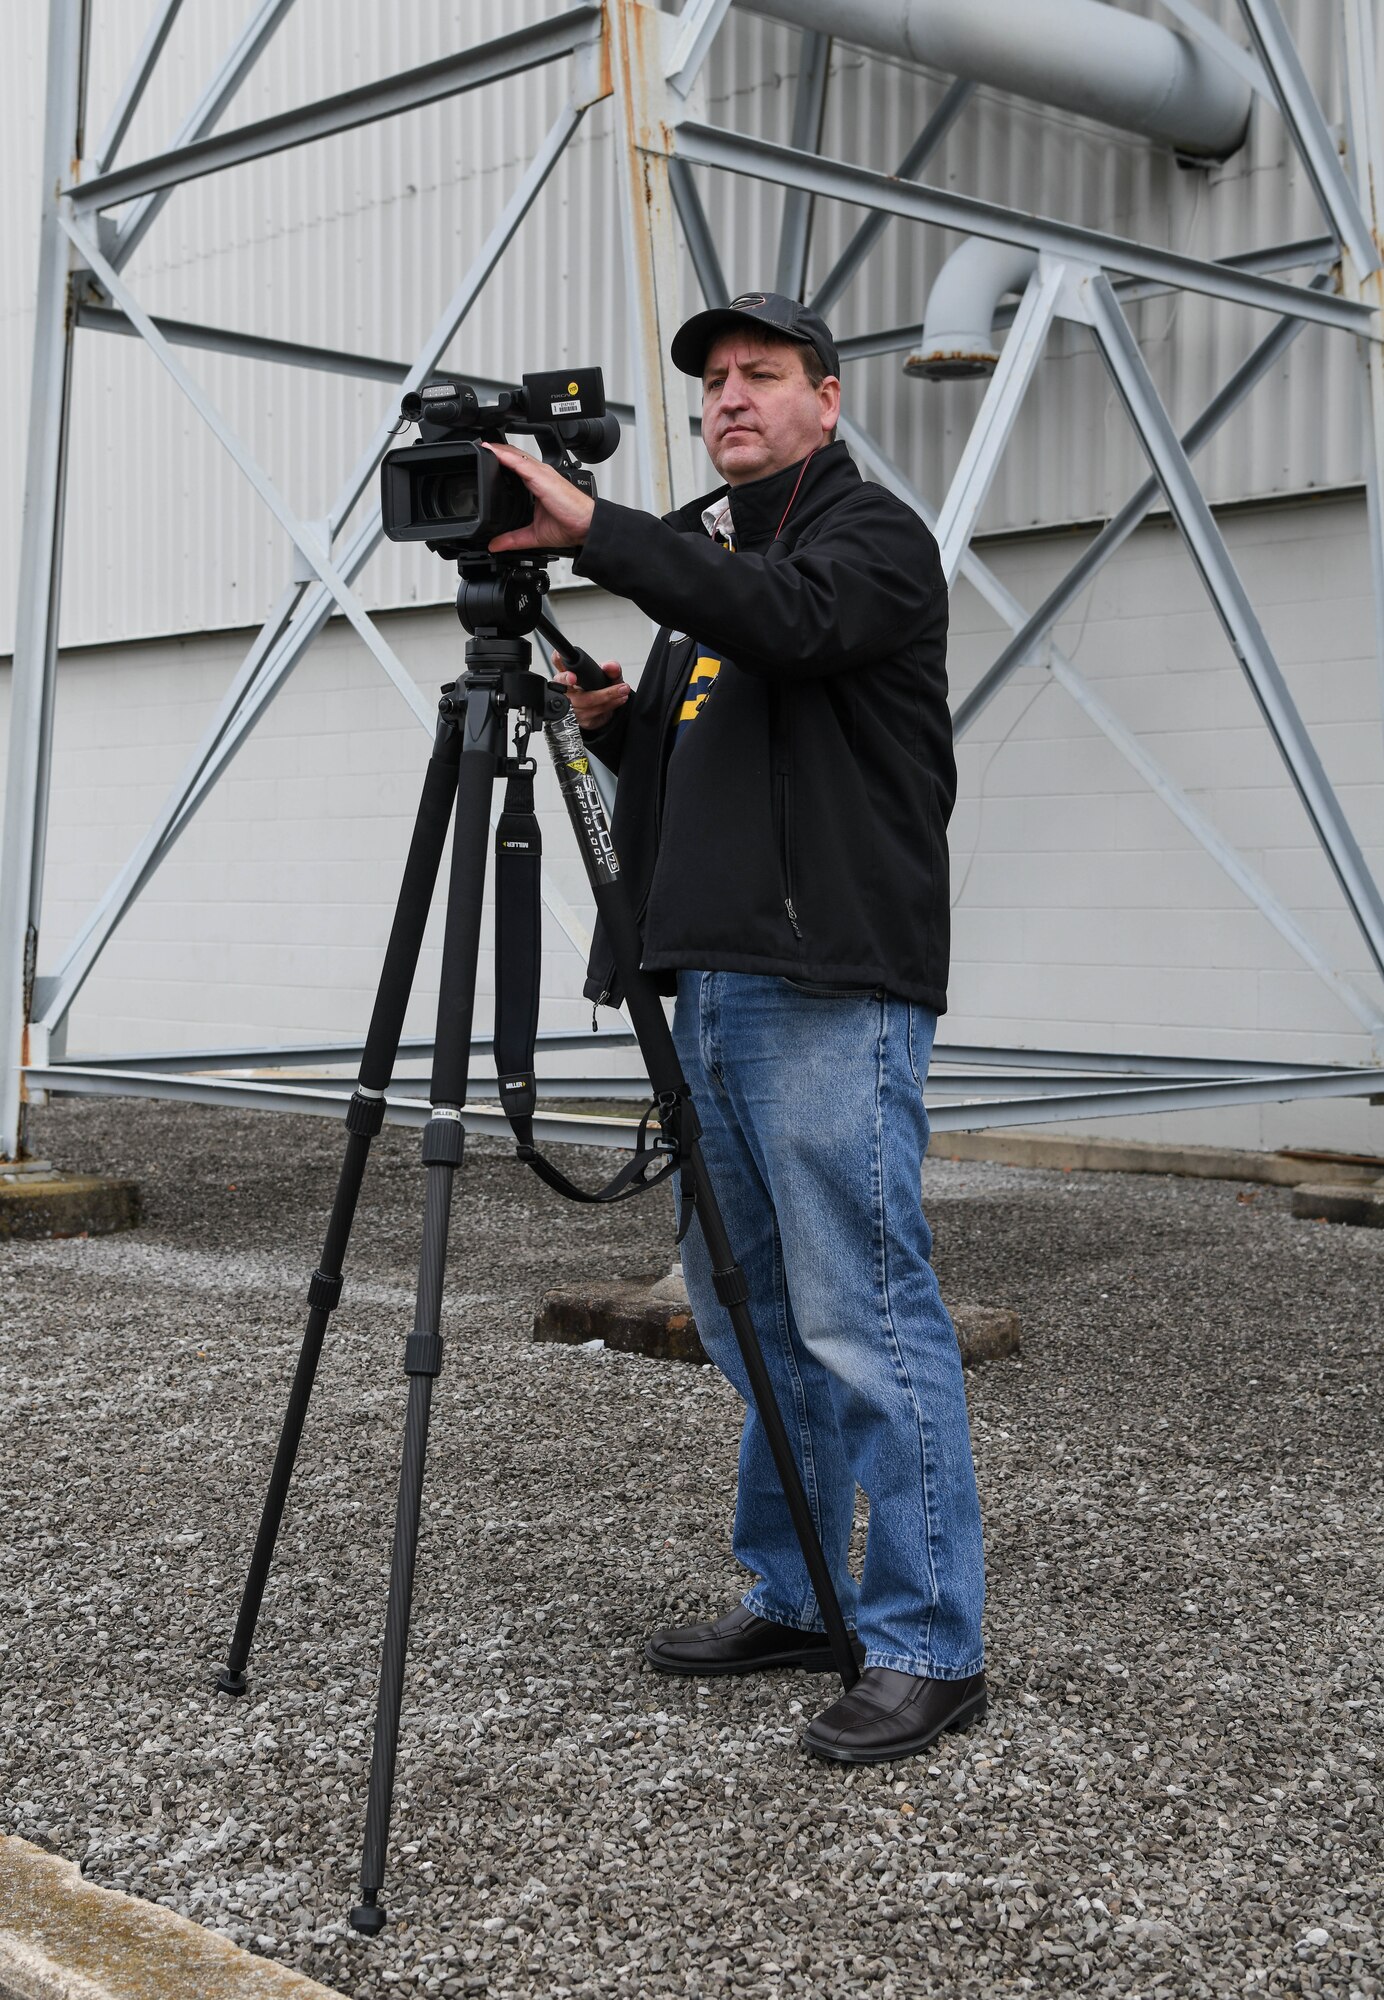 David Wright, a videographer for Arnold Engineering Development Complex, prepares to capture video in support of the AEDC test mission, Dec. 14, 2020, at Arnold Air Force Base, Tenn. (U.S. Air Force photo by Jill Pickett)